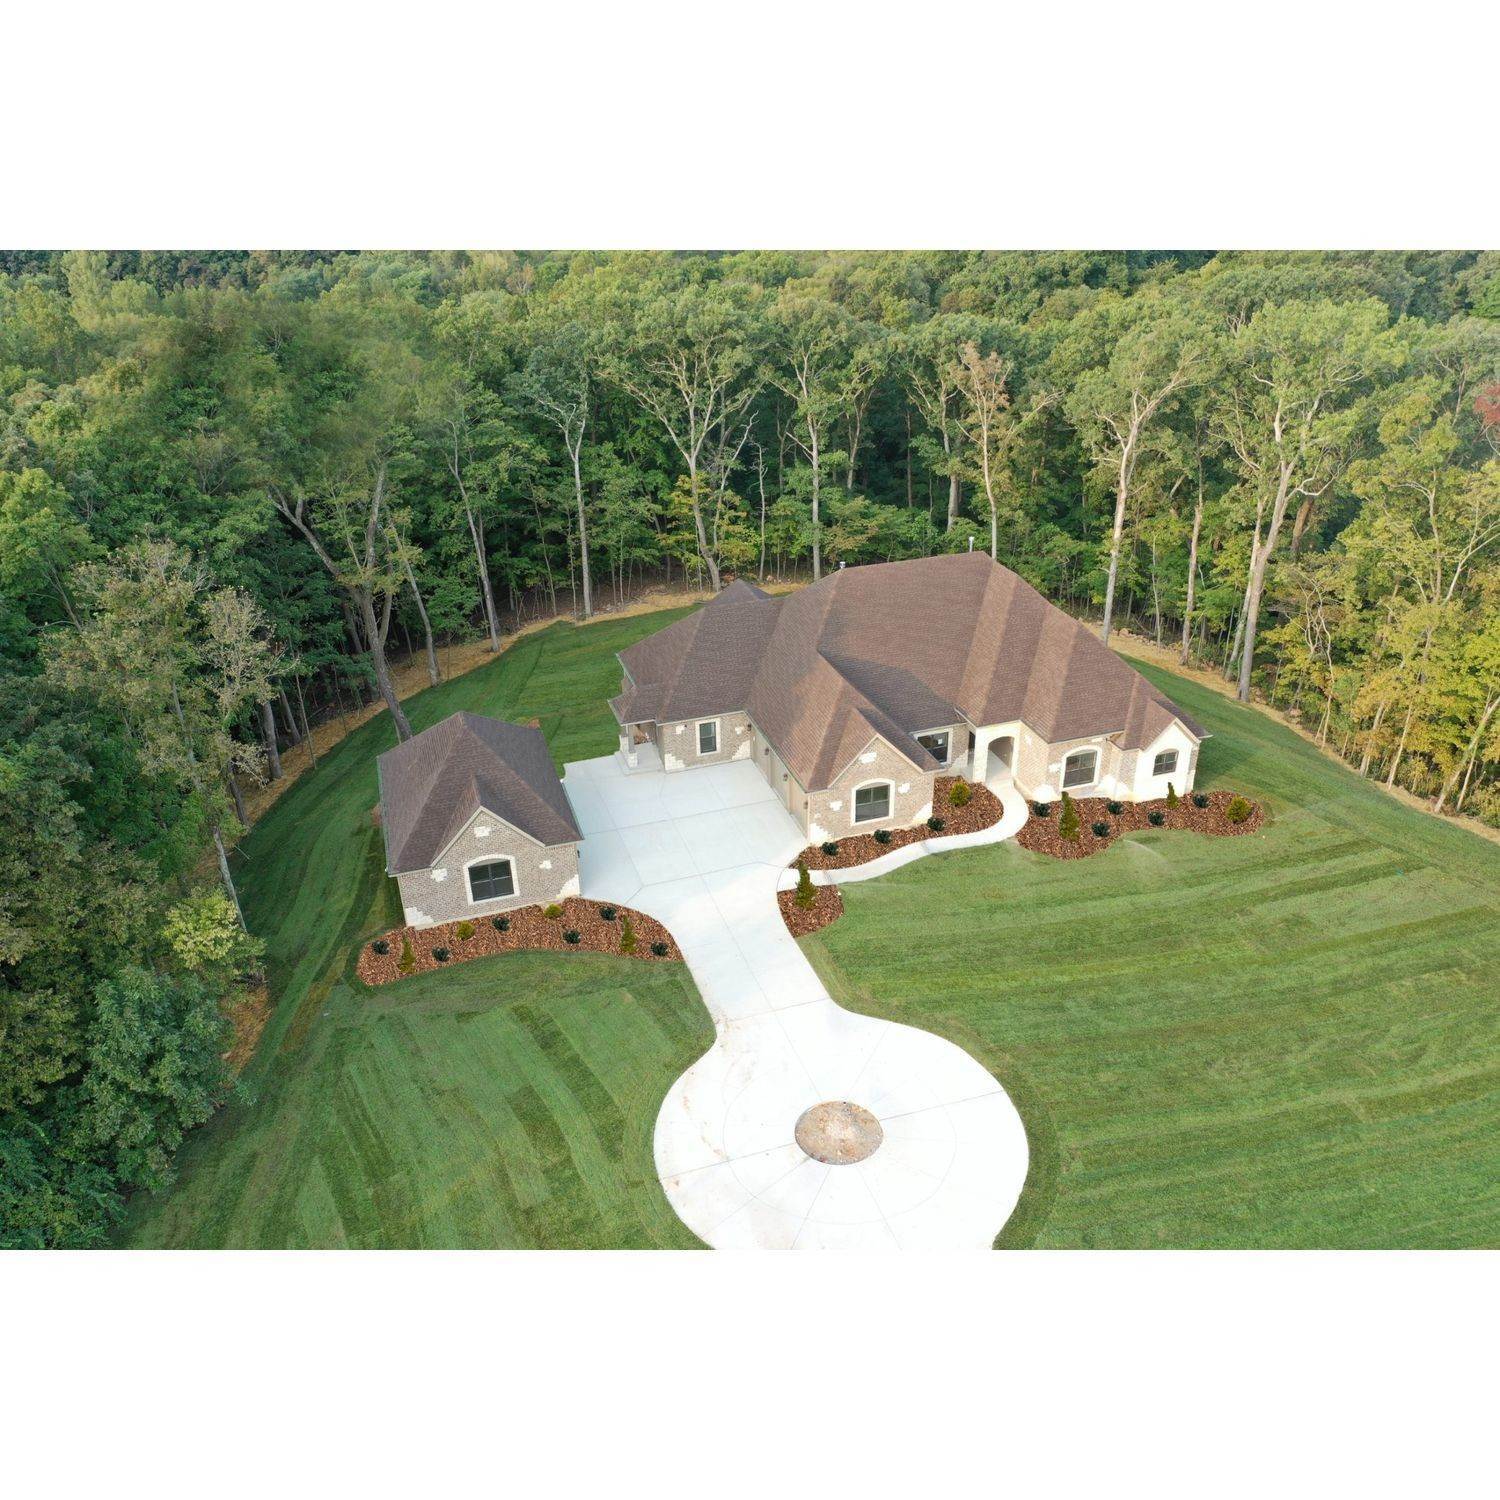 5. Build On Your Land byggnad vid 695 Trade Center Blvd., Suite 200, Chesterfield, MO 63005